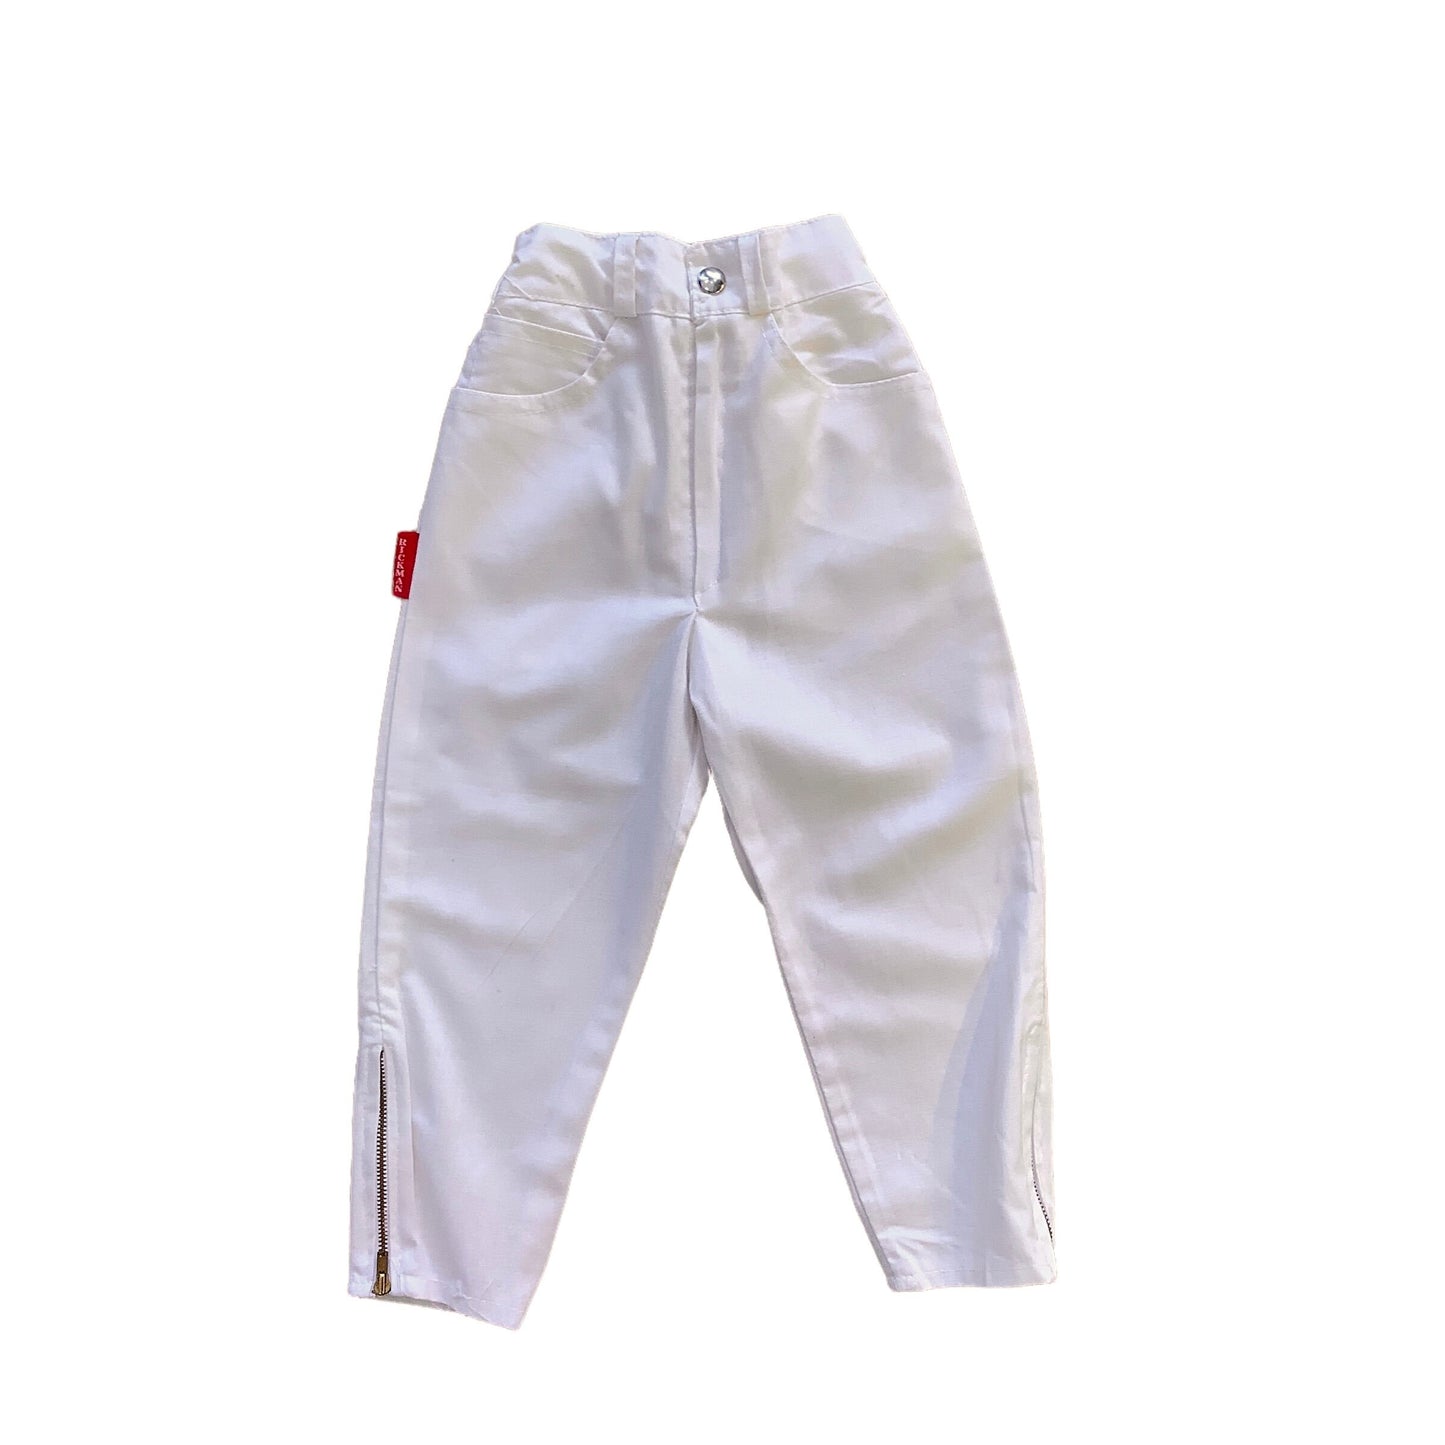 Vintage 1970s White Toddler "Cigarette" Trousers 12-18 Months